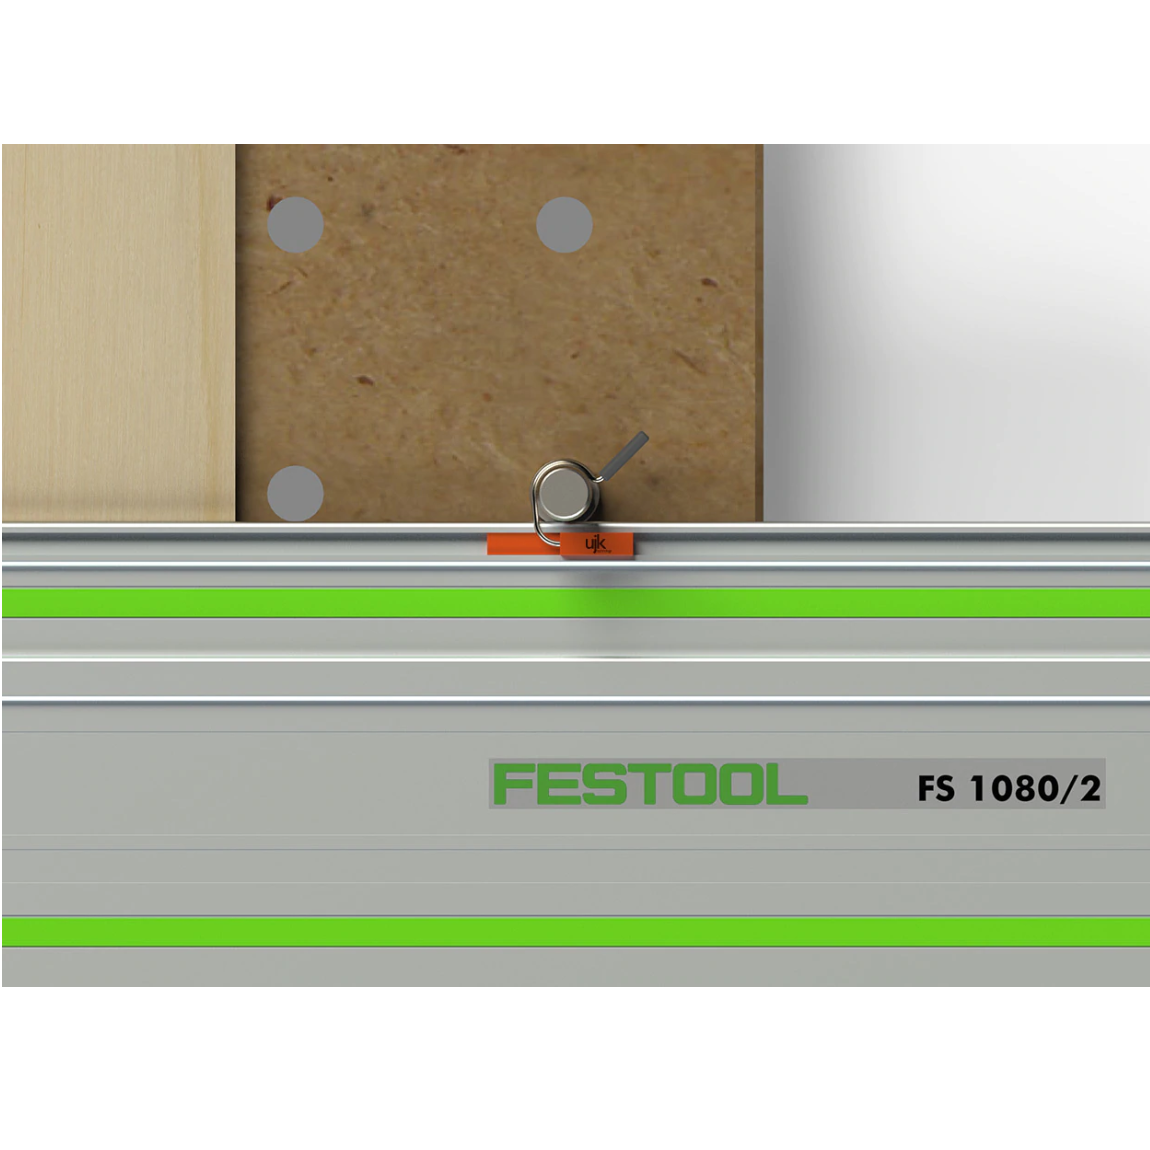 UJK Dog Rail Clips slide into the T-slot of a Festool FS Guide Rail and over a 20mm dog in a MFT or similar work surface.